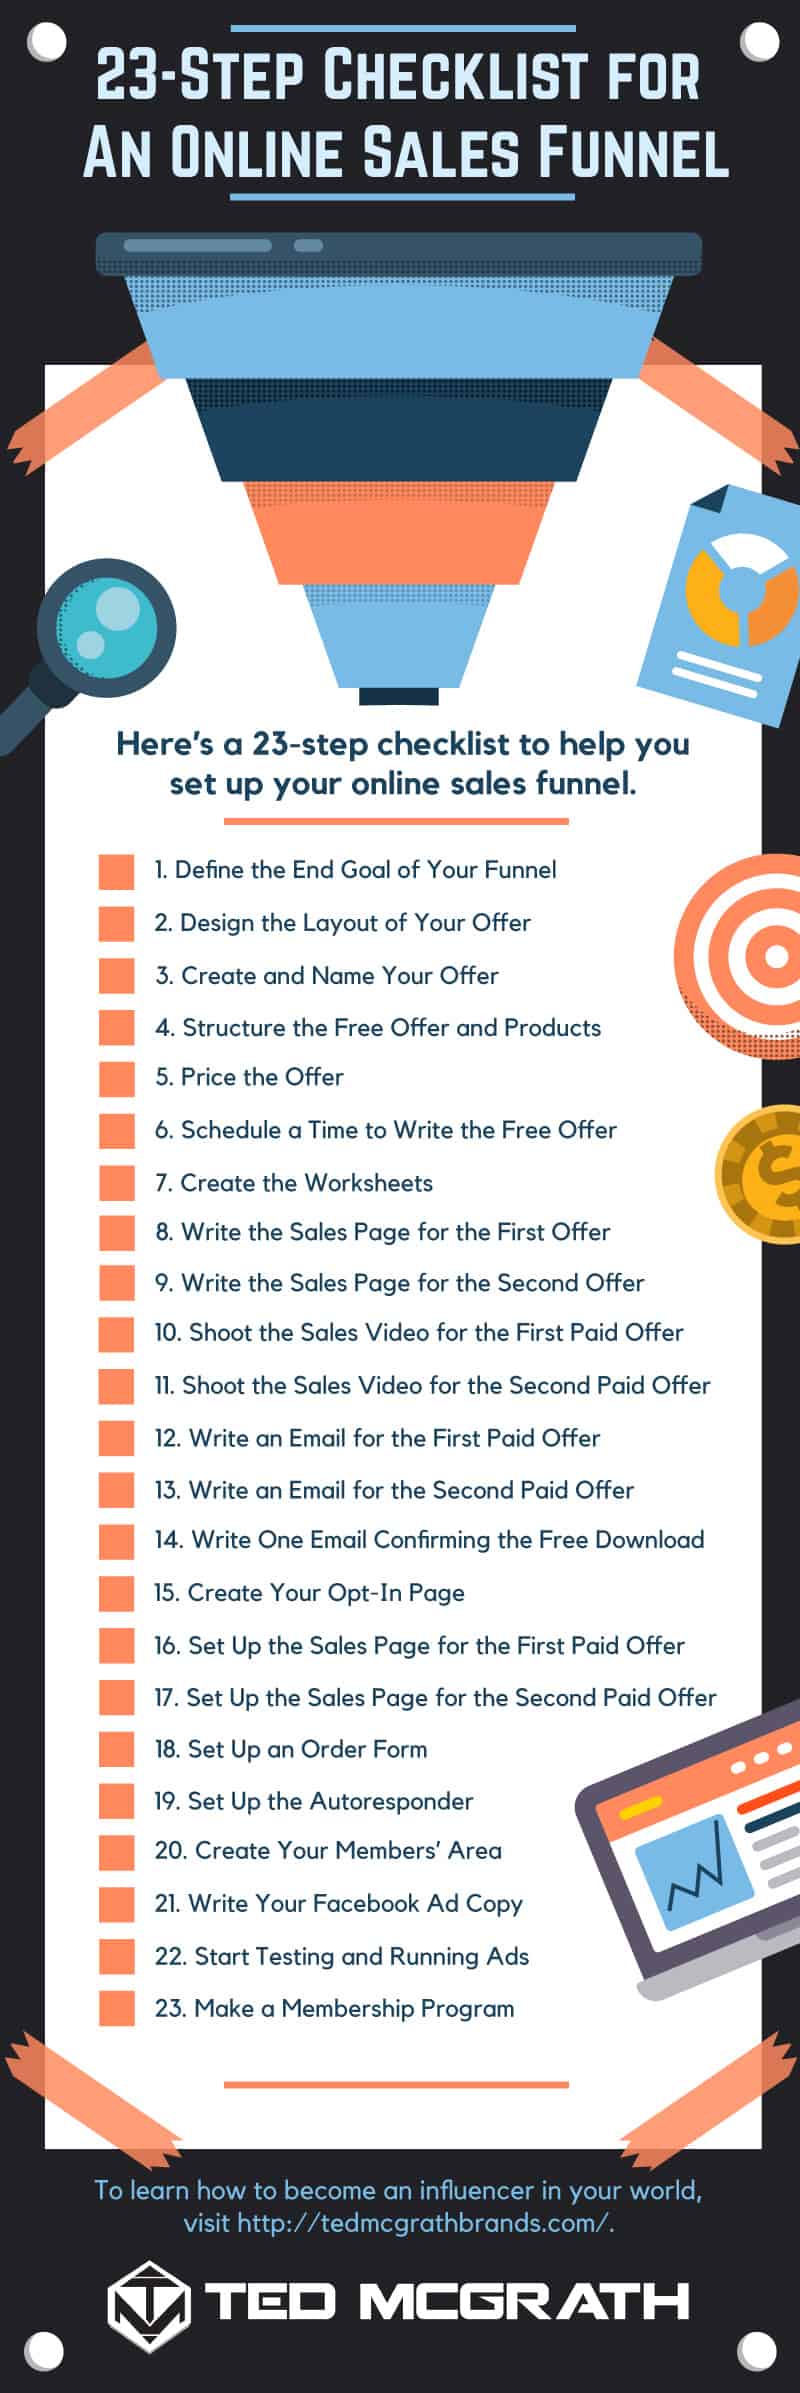 23-Step Checklist for An Online Sales Funnel